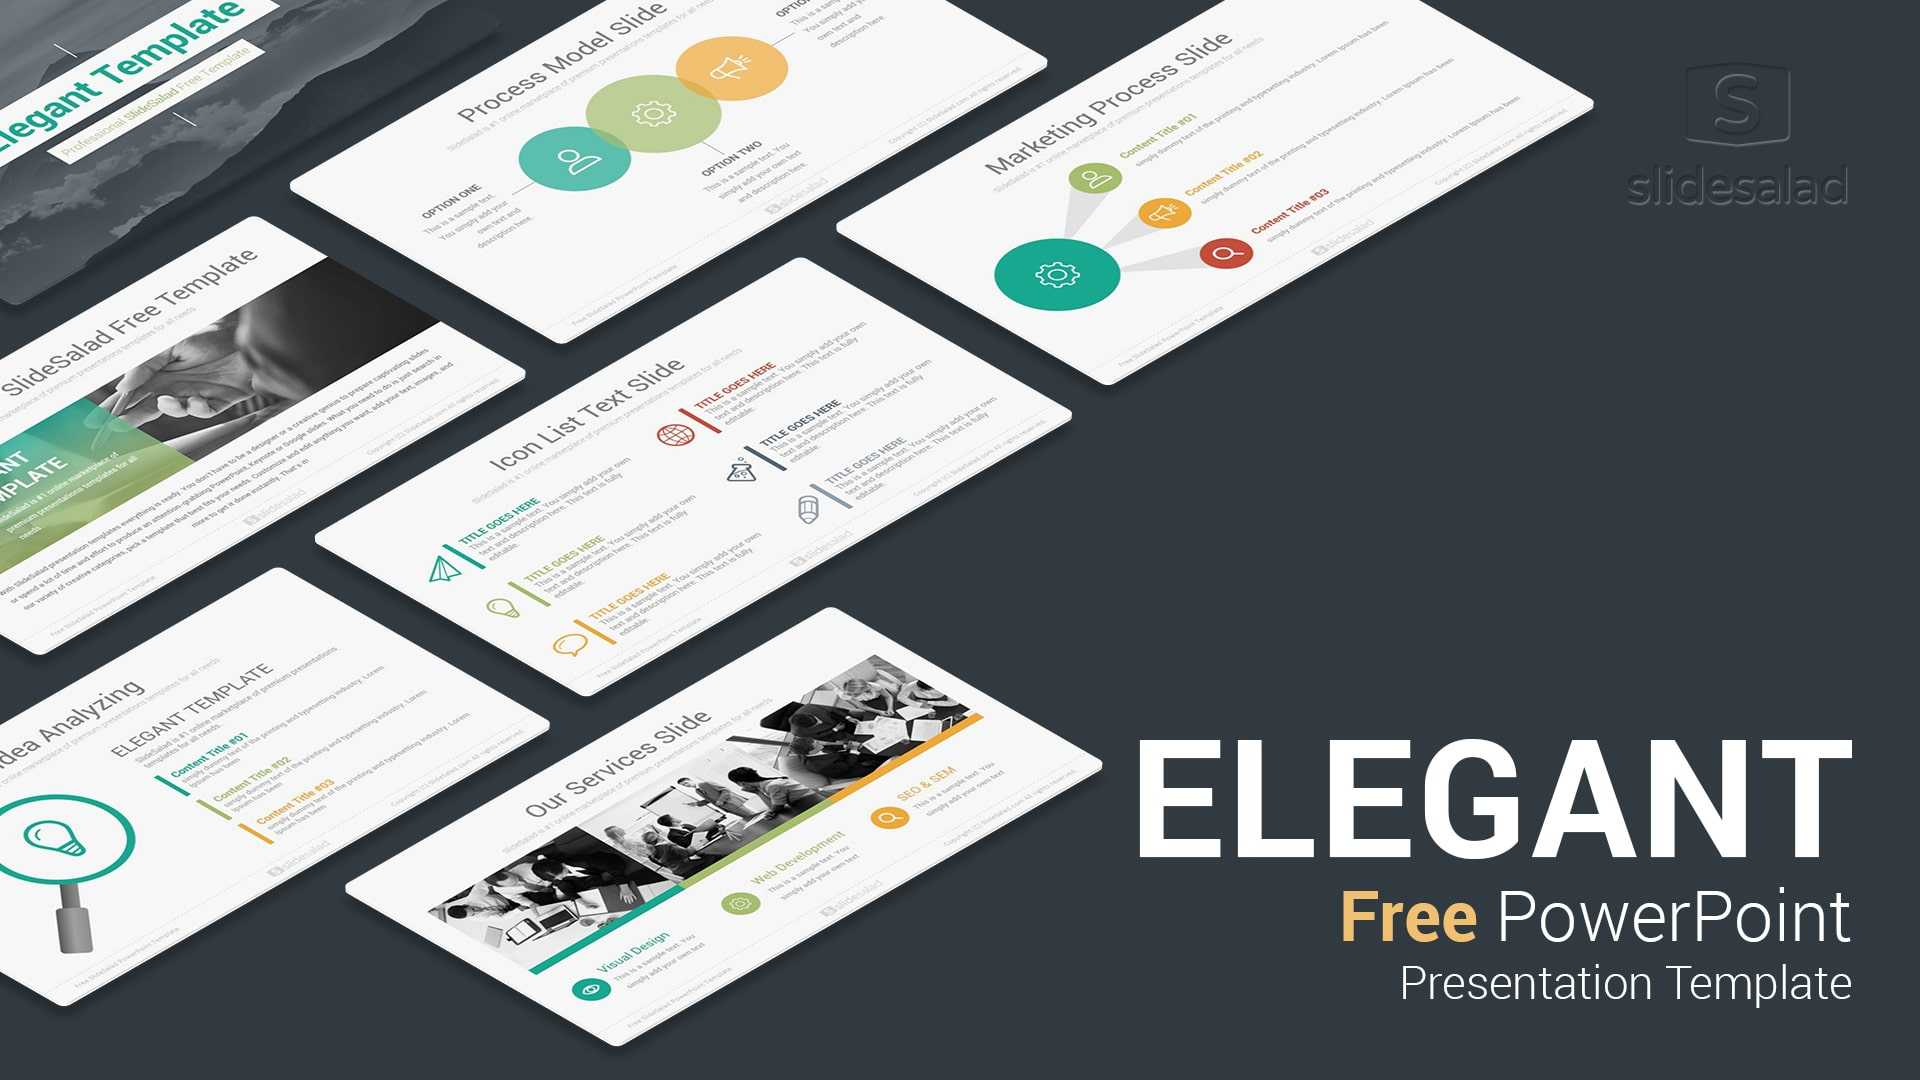 Elegant Free Download Powerpoint Templates For Presentation Inside Powerpoint Slides Design Templates For Free